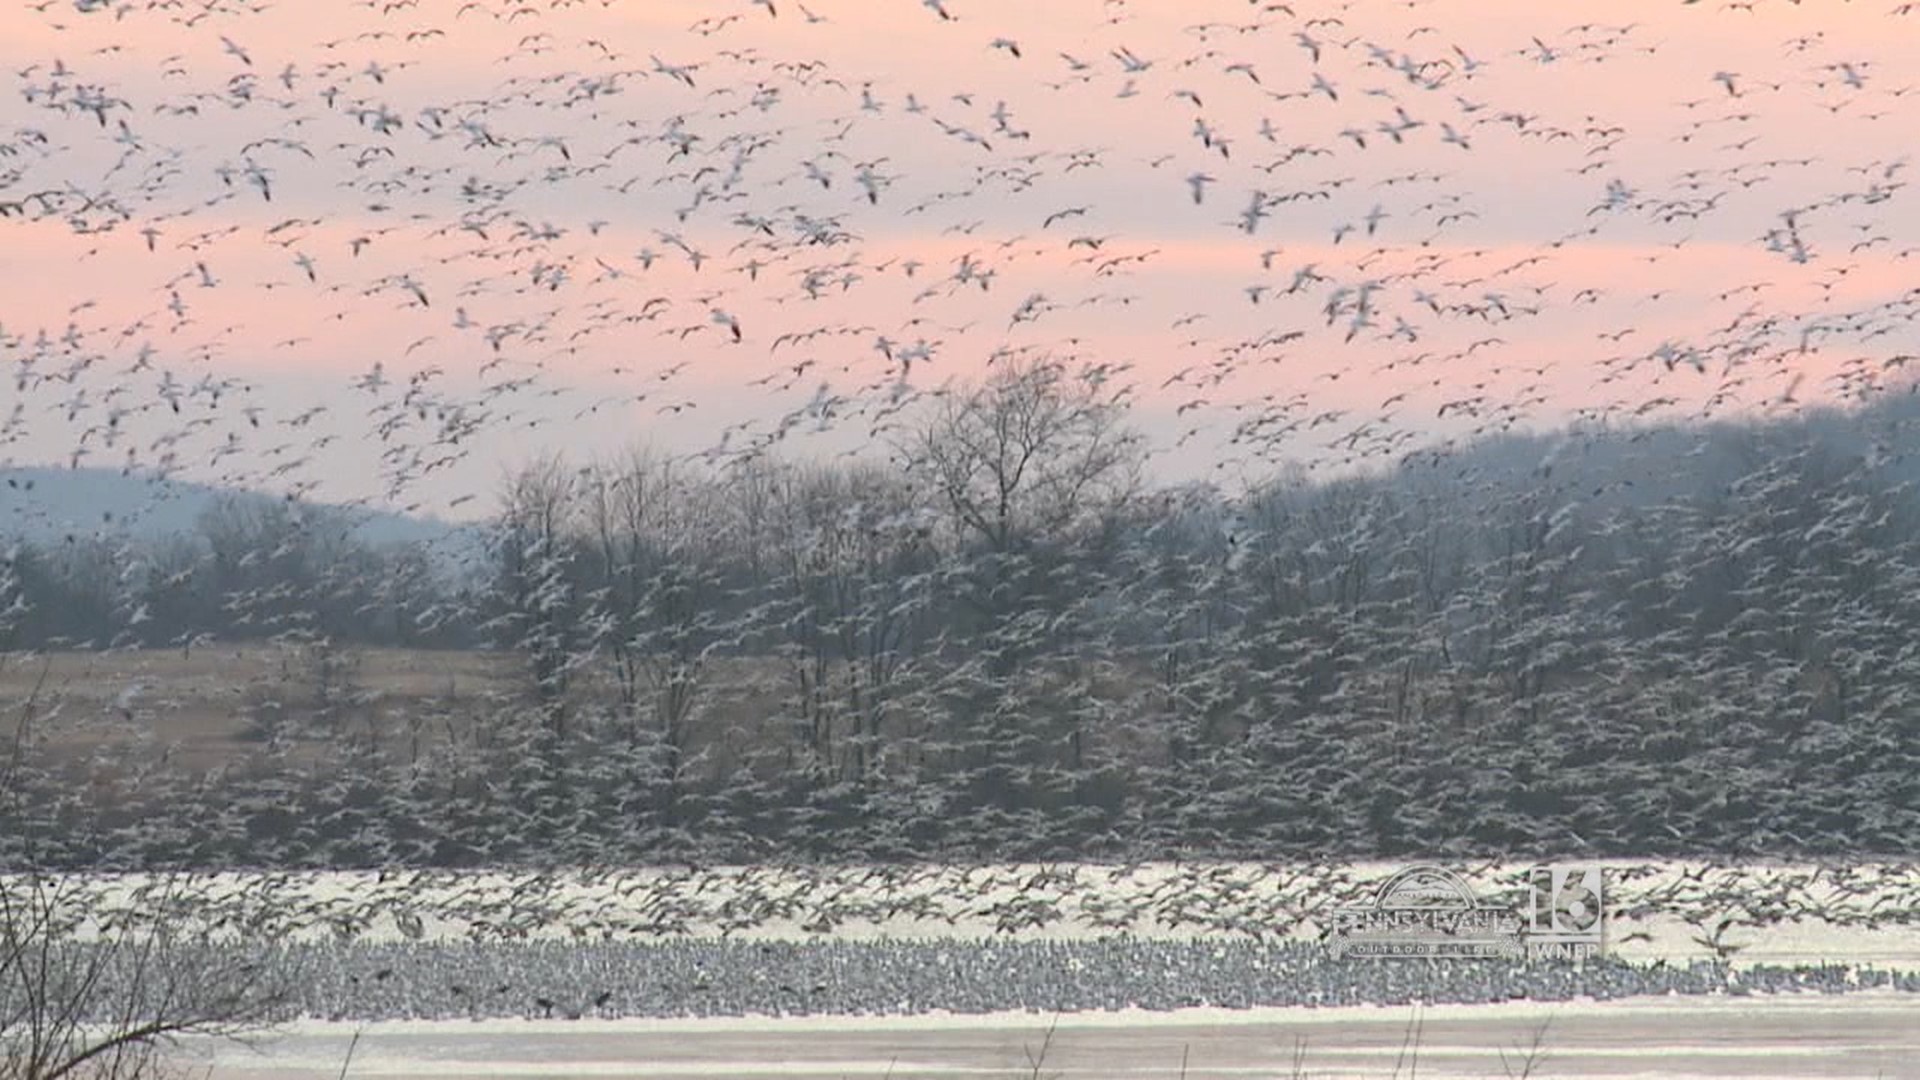 Annual Snow Goose Migration at the Middle Creek Wildlife Management Area.